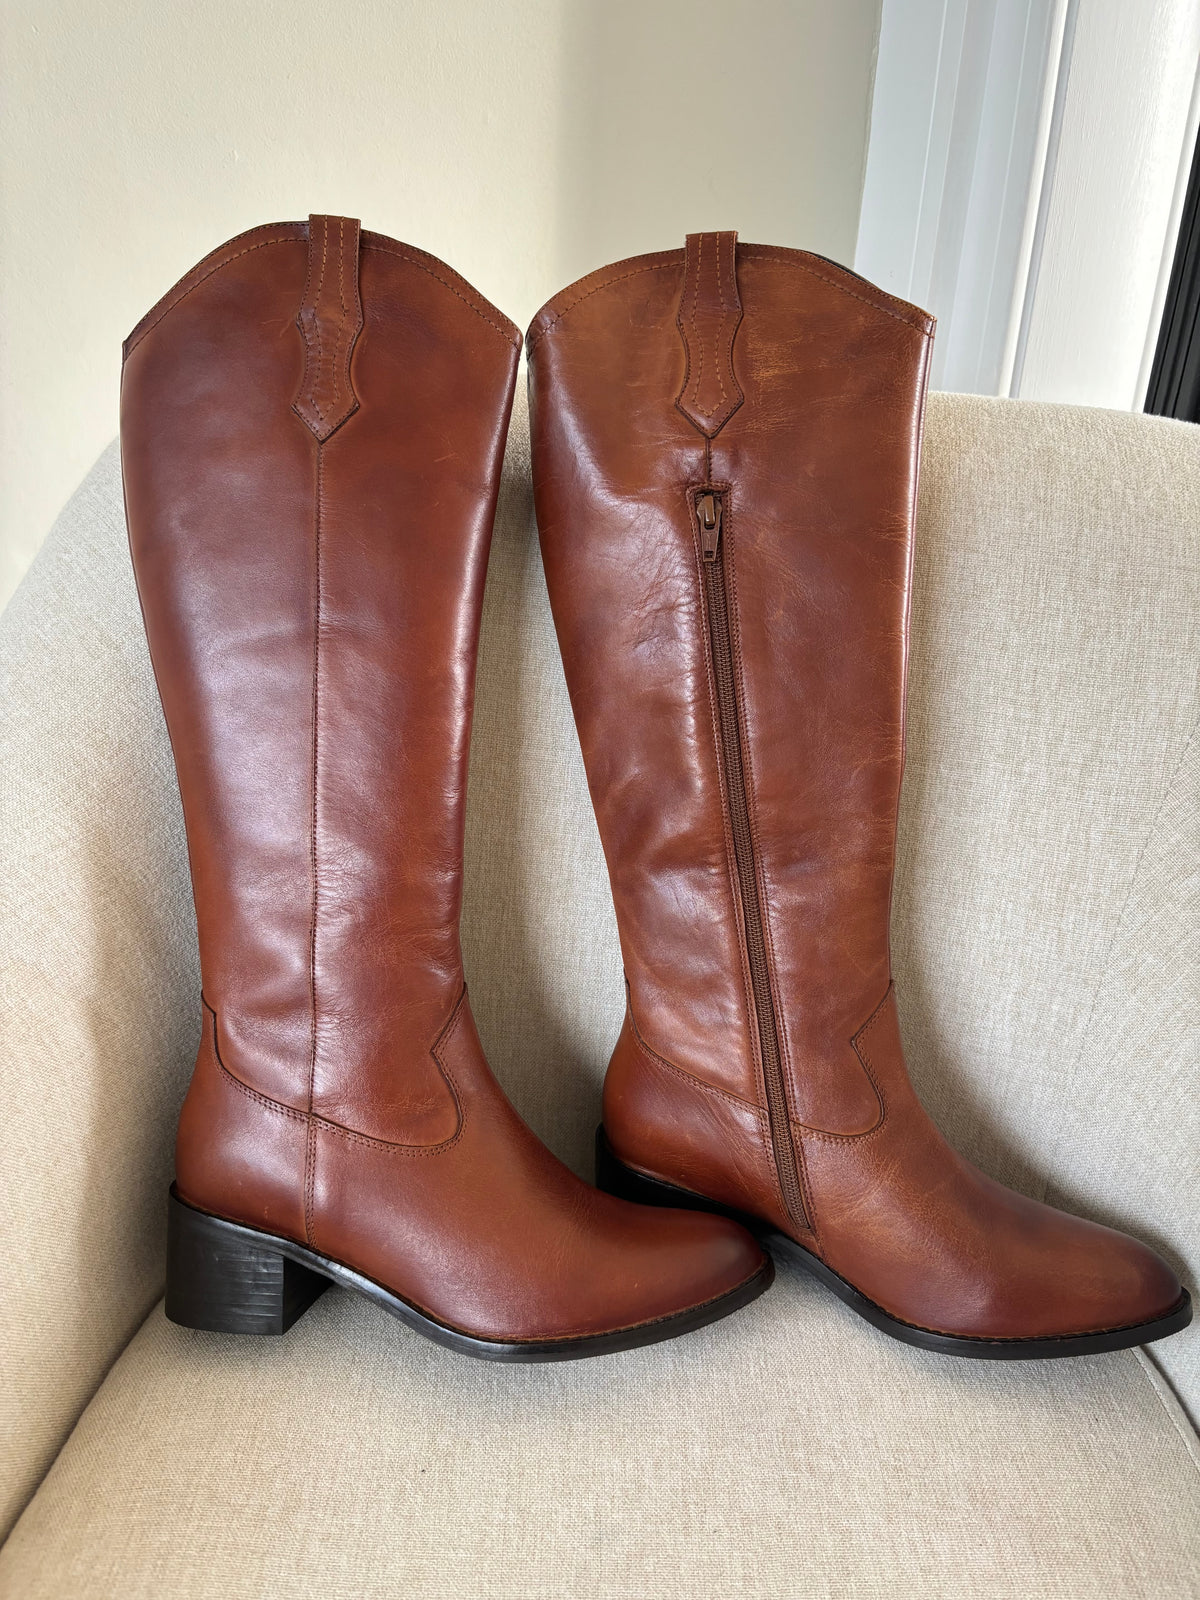 Tan Leather Ferns Knee High Boots by Ravel Size 5